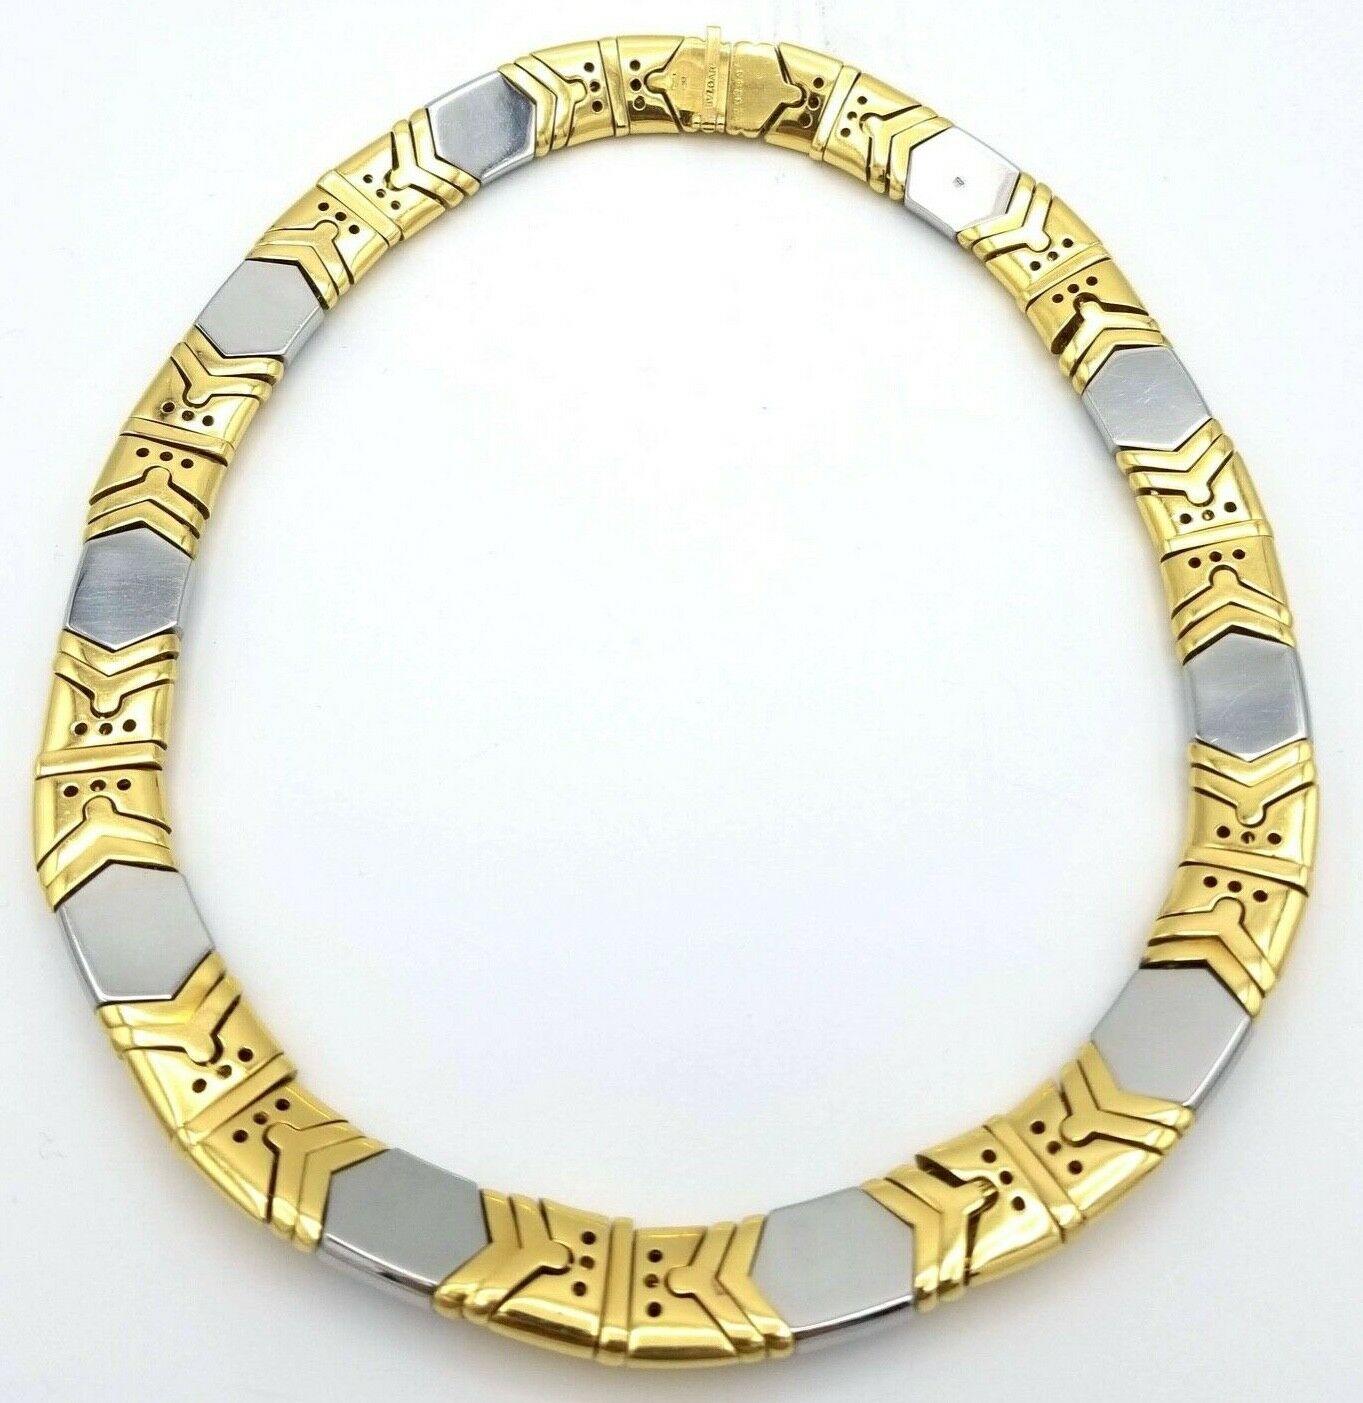 Bvlgari 18k Yellow Gold & Stainless Steel Choker Necklace Vintage

Here is your chance to purchase a beautiful and highly collectible designer necklace.  Truly a great piece at a great price! 

The weight is 219 grams, this item is for a normal size